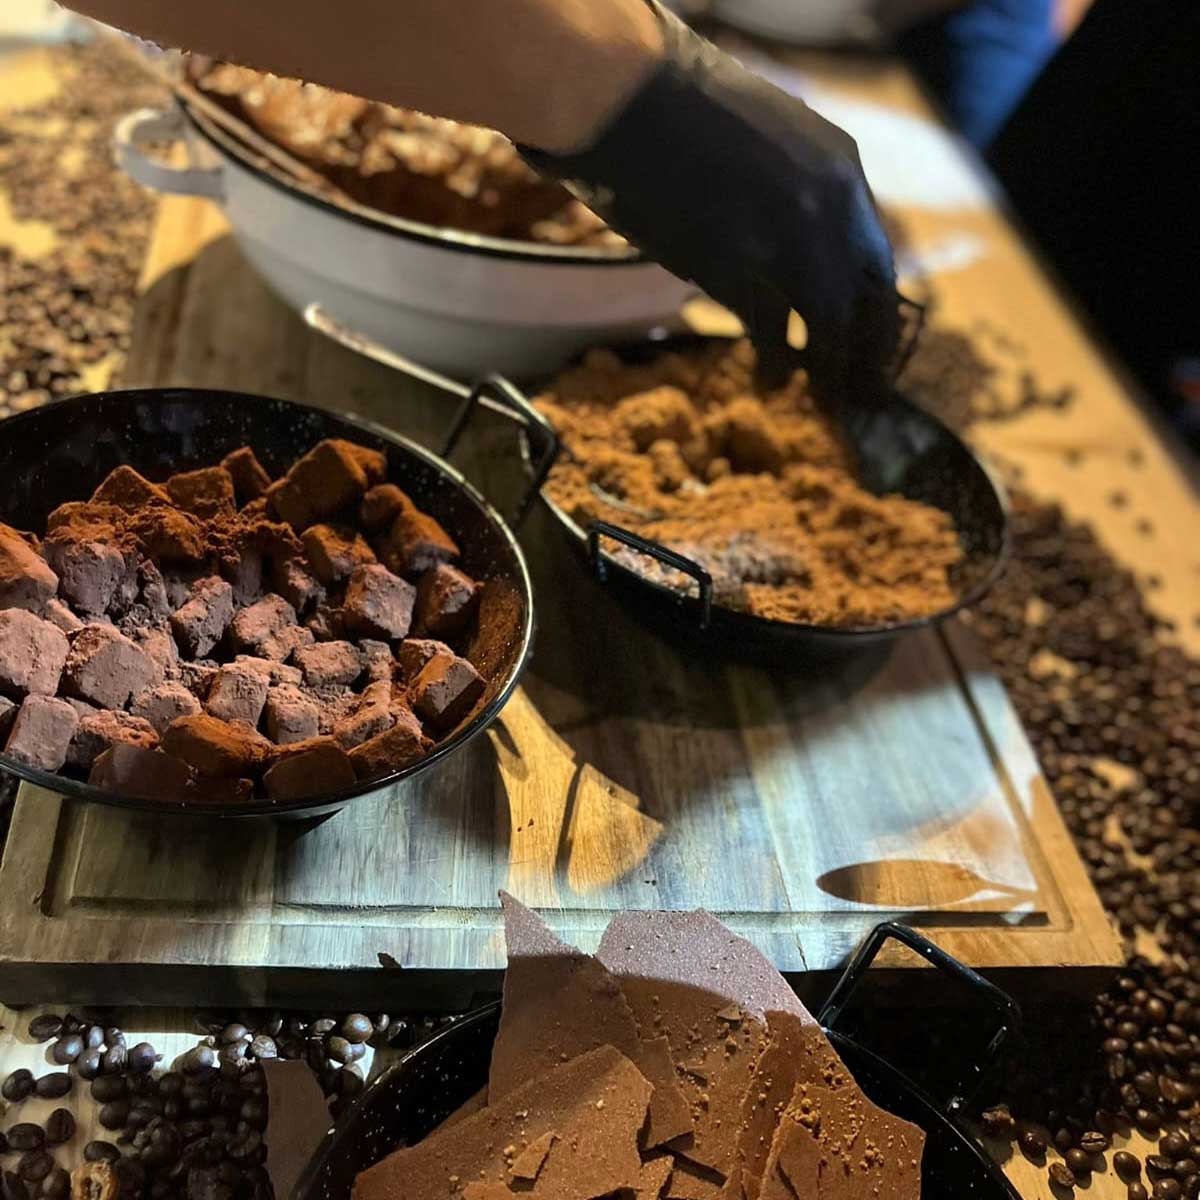 Dishes with chocolate twill, cubes of truffles, and cocoa streusel on a wooden board and coffee beans